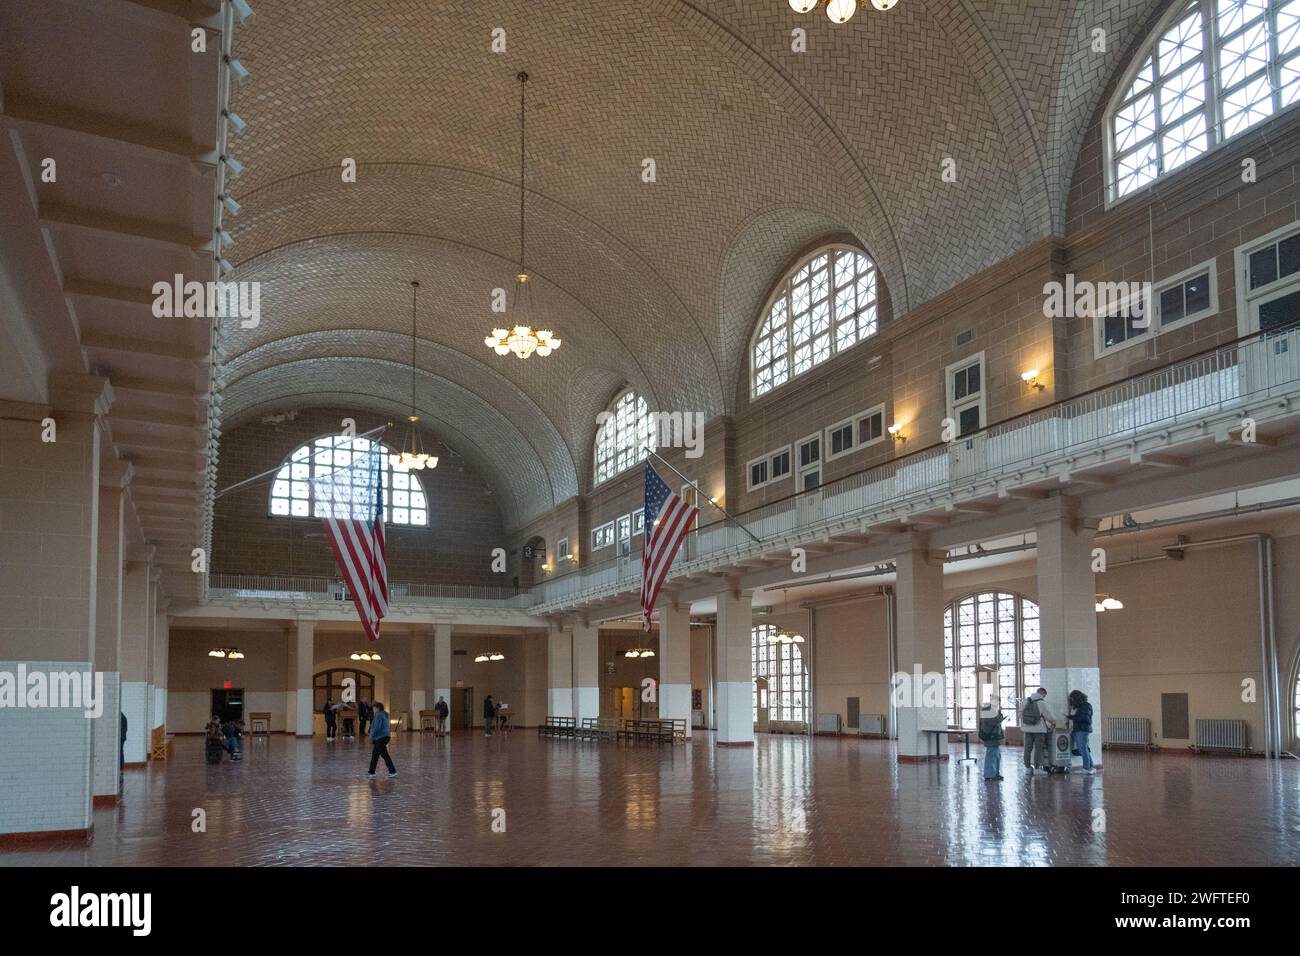 The Registry Room in the Ellis Island Musuem of Immigration in New York City. Photo date: Friday, January 26, 2024. Photo: Richard Gray/Alamy Stock Photo